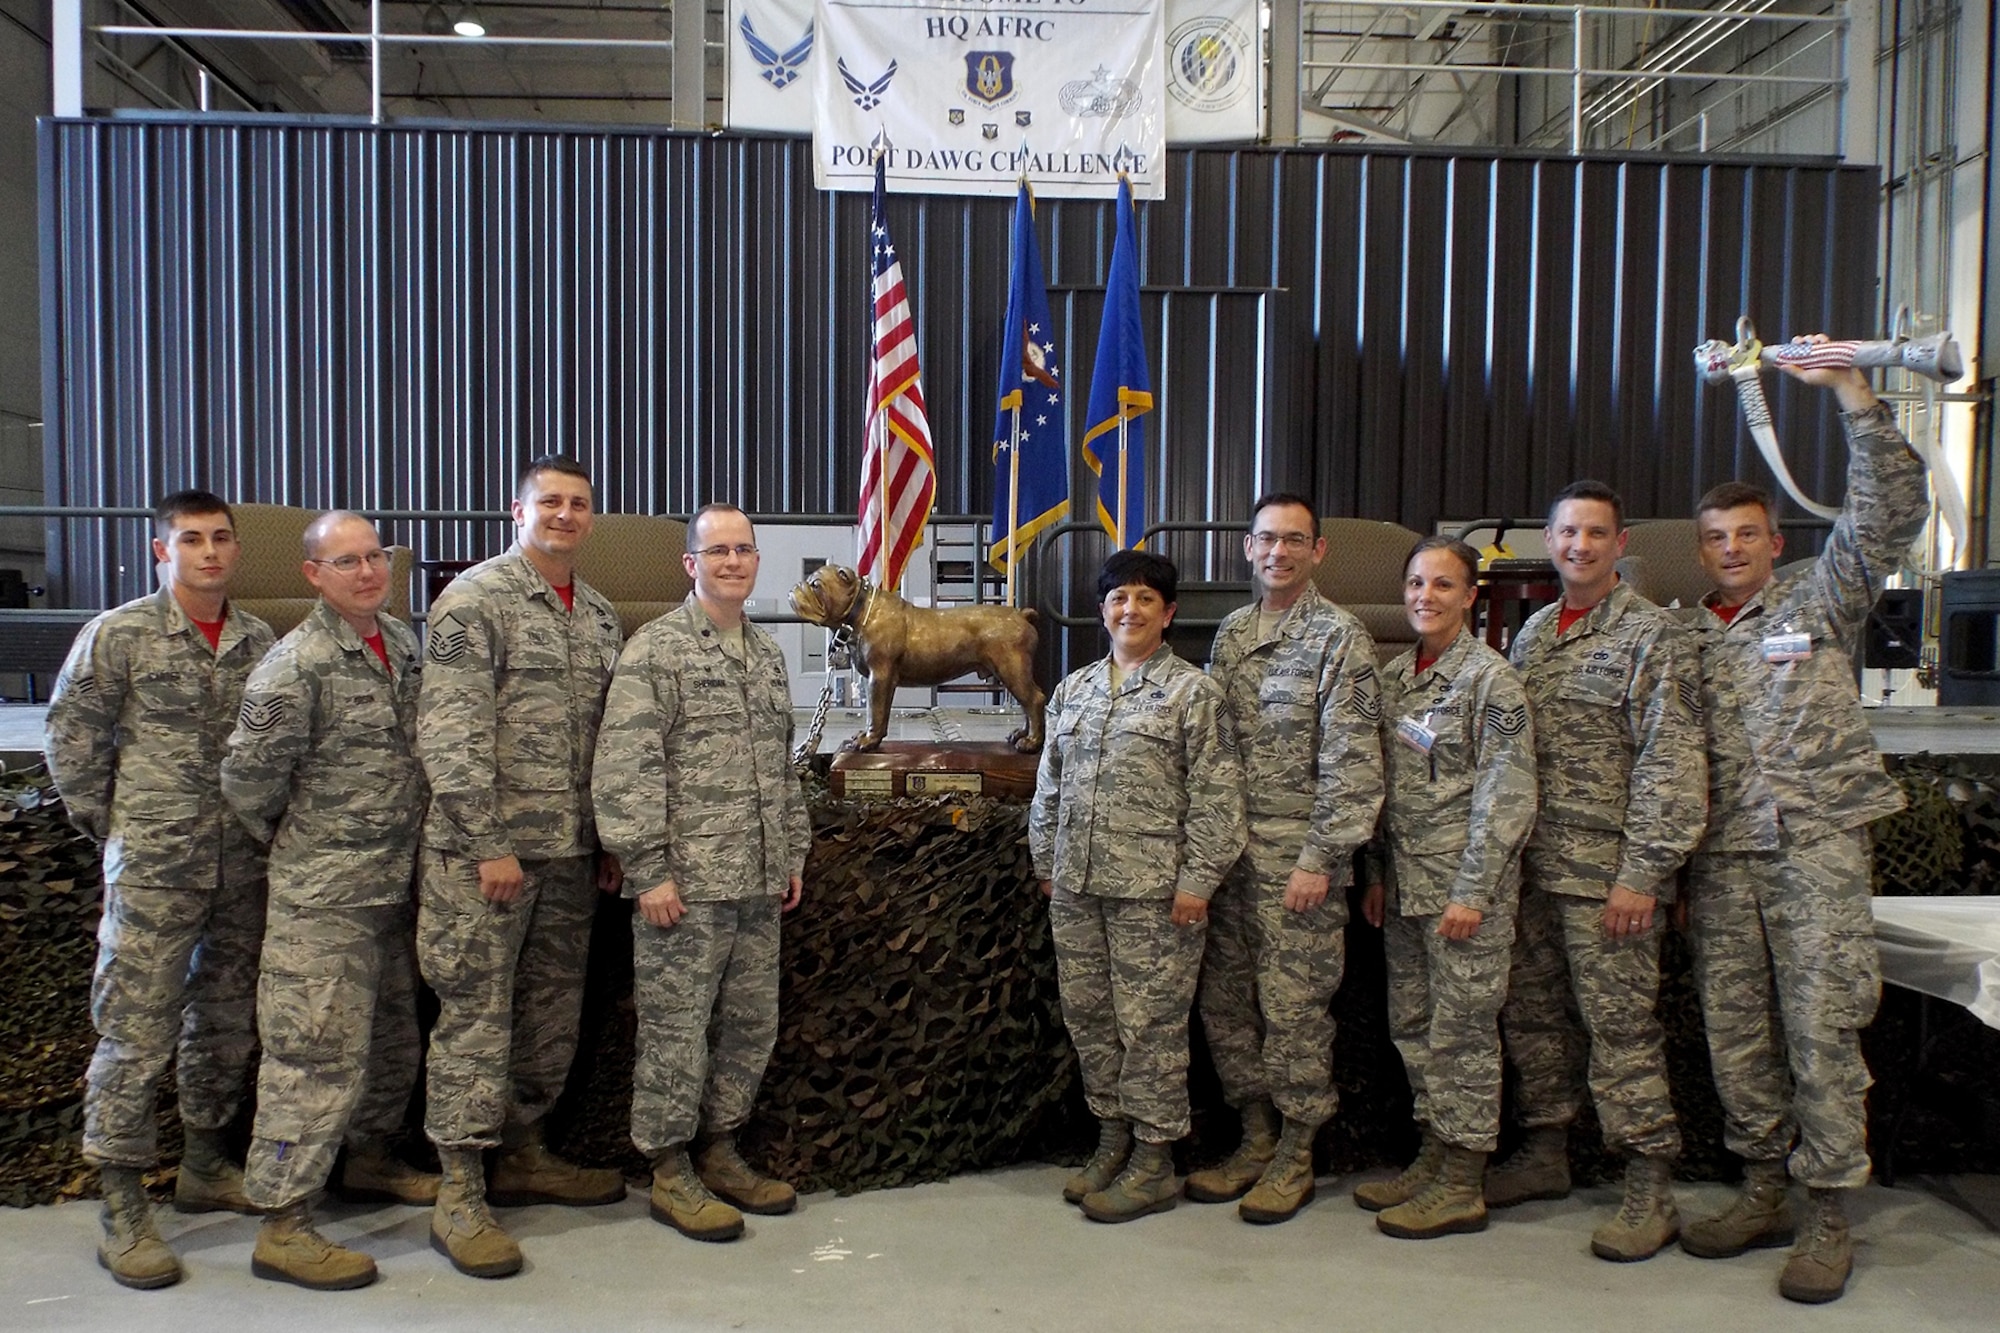 U.S. Air Force Reserve members from the 96th Aerial Port Squadron, 913th Airlift Group, pose for photos after winning the “Top Dawg” trophy during the Air Force Reserve Command Port Dawg Challenge awards ceremony April 27, 2017, at Dobbins Air Reserve Base, Ga. The 96th APS is the first repeat winner since the competition began in 2010, and will return the “Top Dawg” trophy to Little Rock Air Force Base. (U.S. Air Force photo by Tech. Sgt. Debra Gentry/Released)